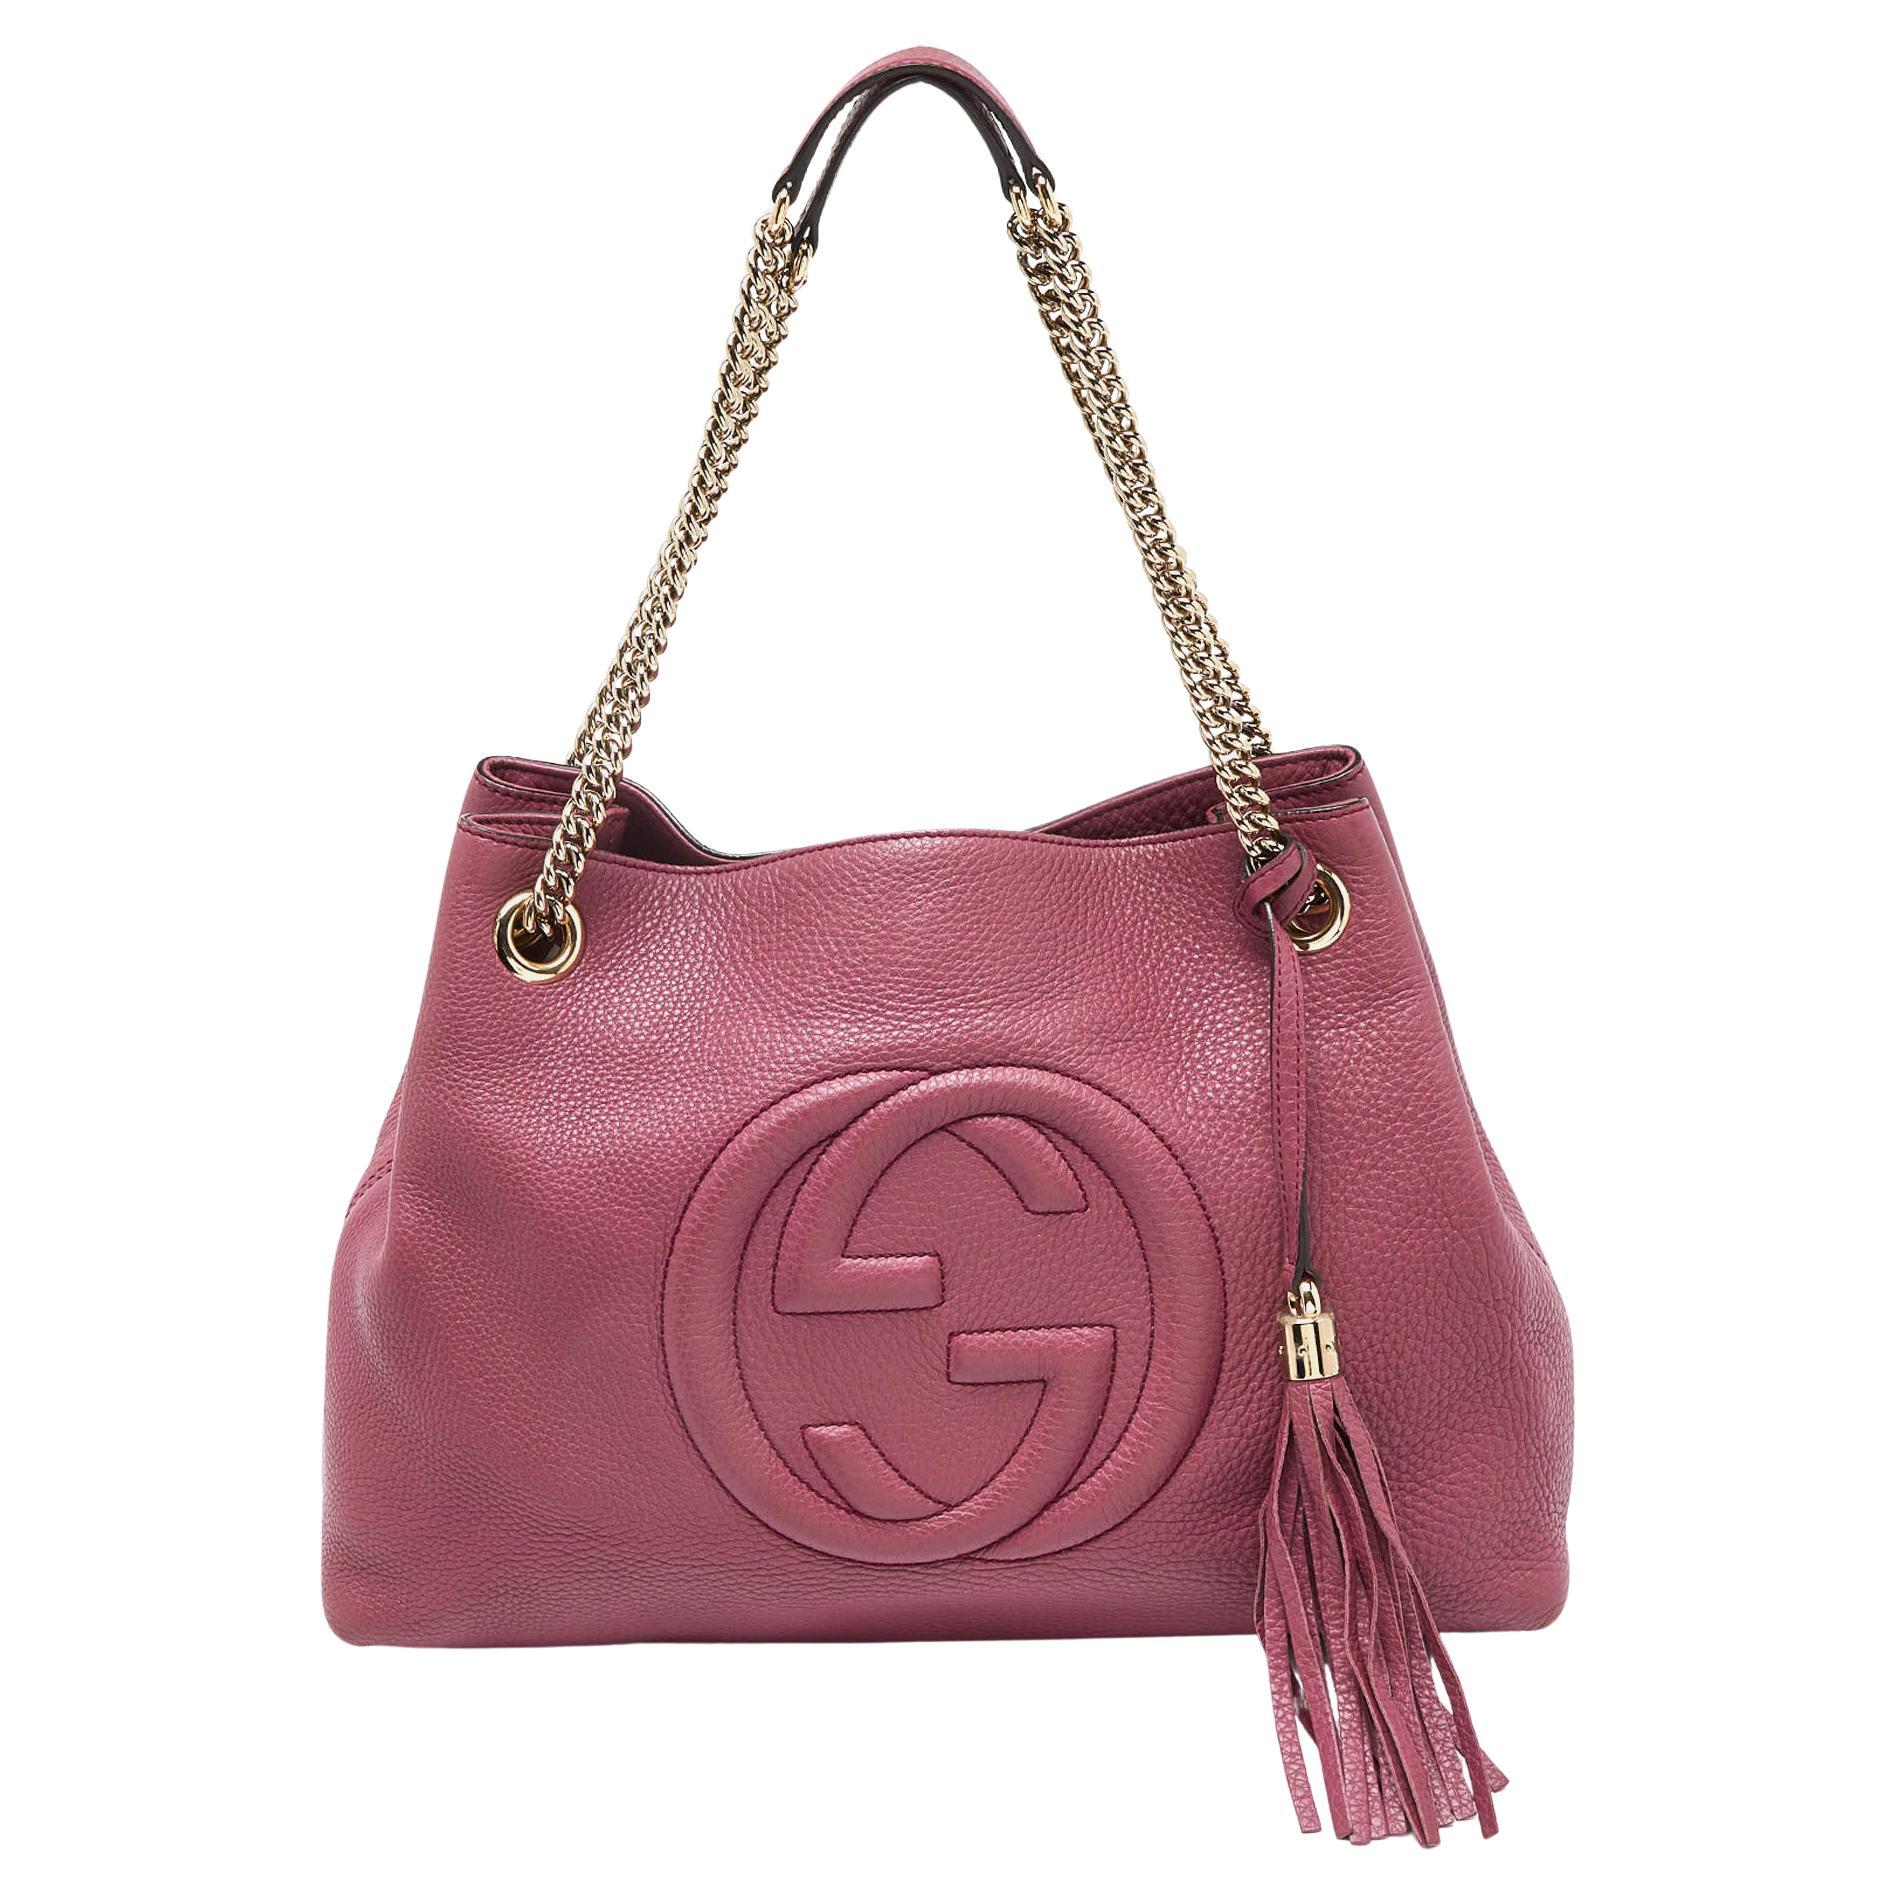 Gucci Pink Pebbled Leather Medium Soho Chain Tote For Sale